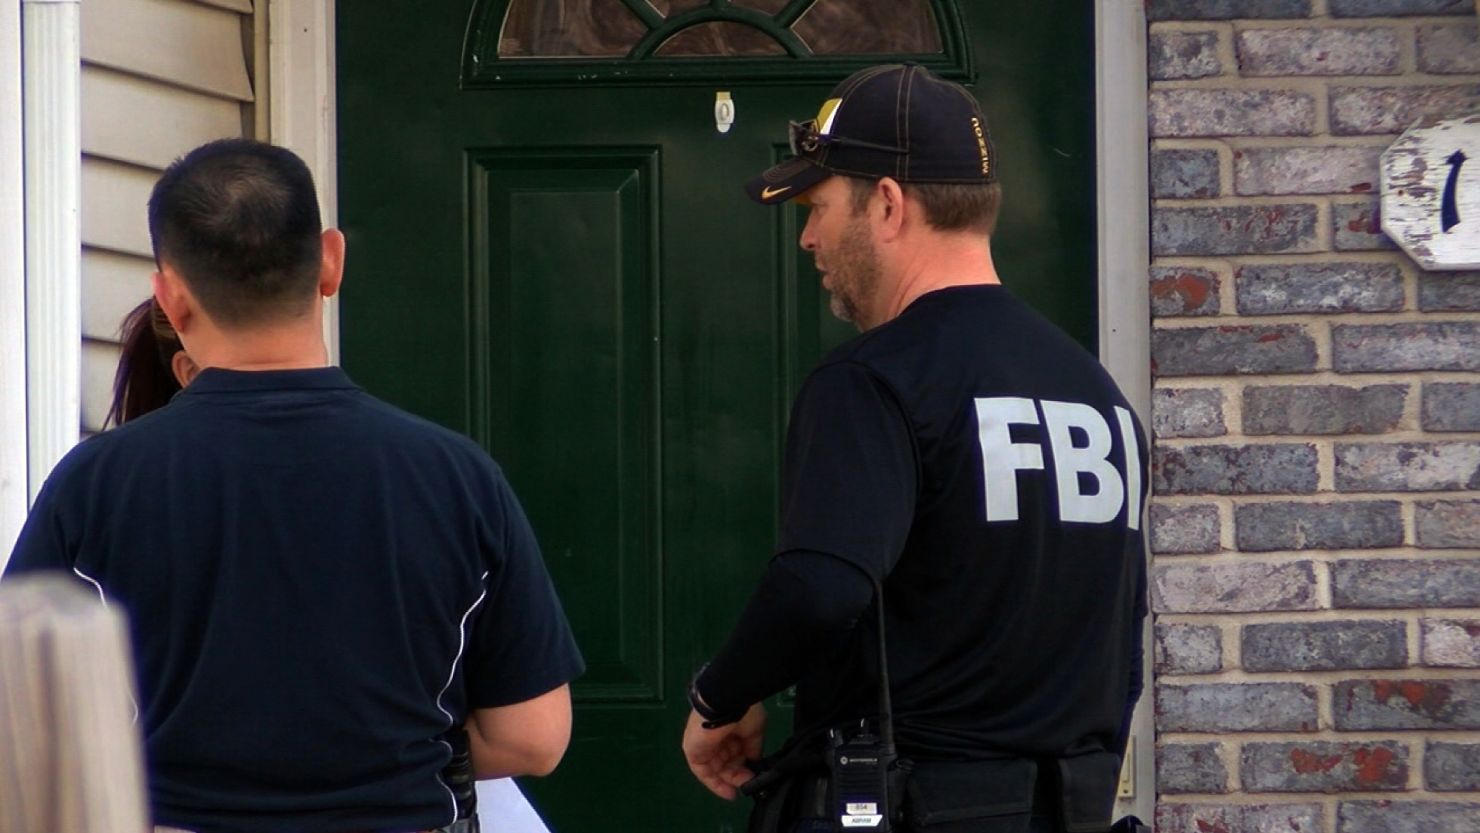 FBI agents stand in front of the home of Robert Lorenzo Hester Jr. of Columbia, Missouri.